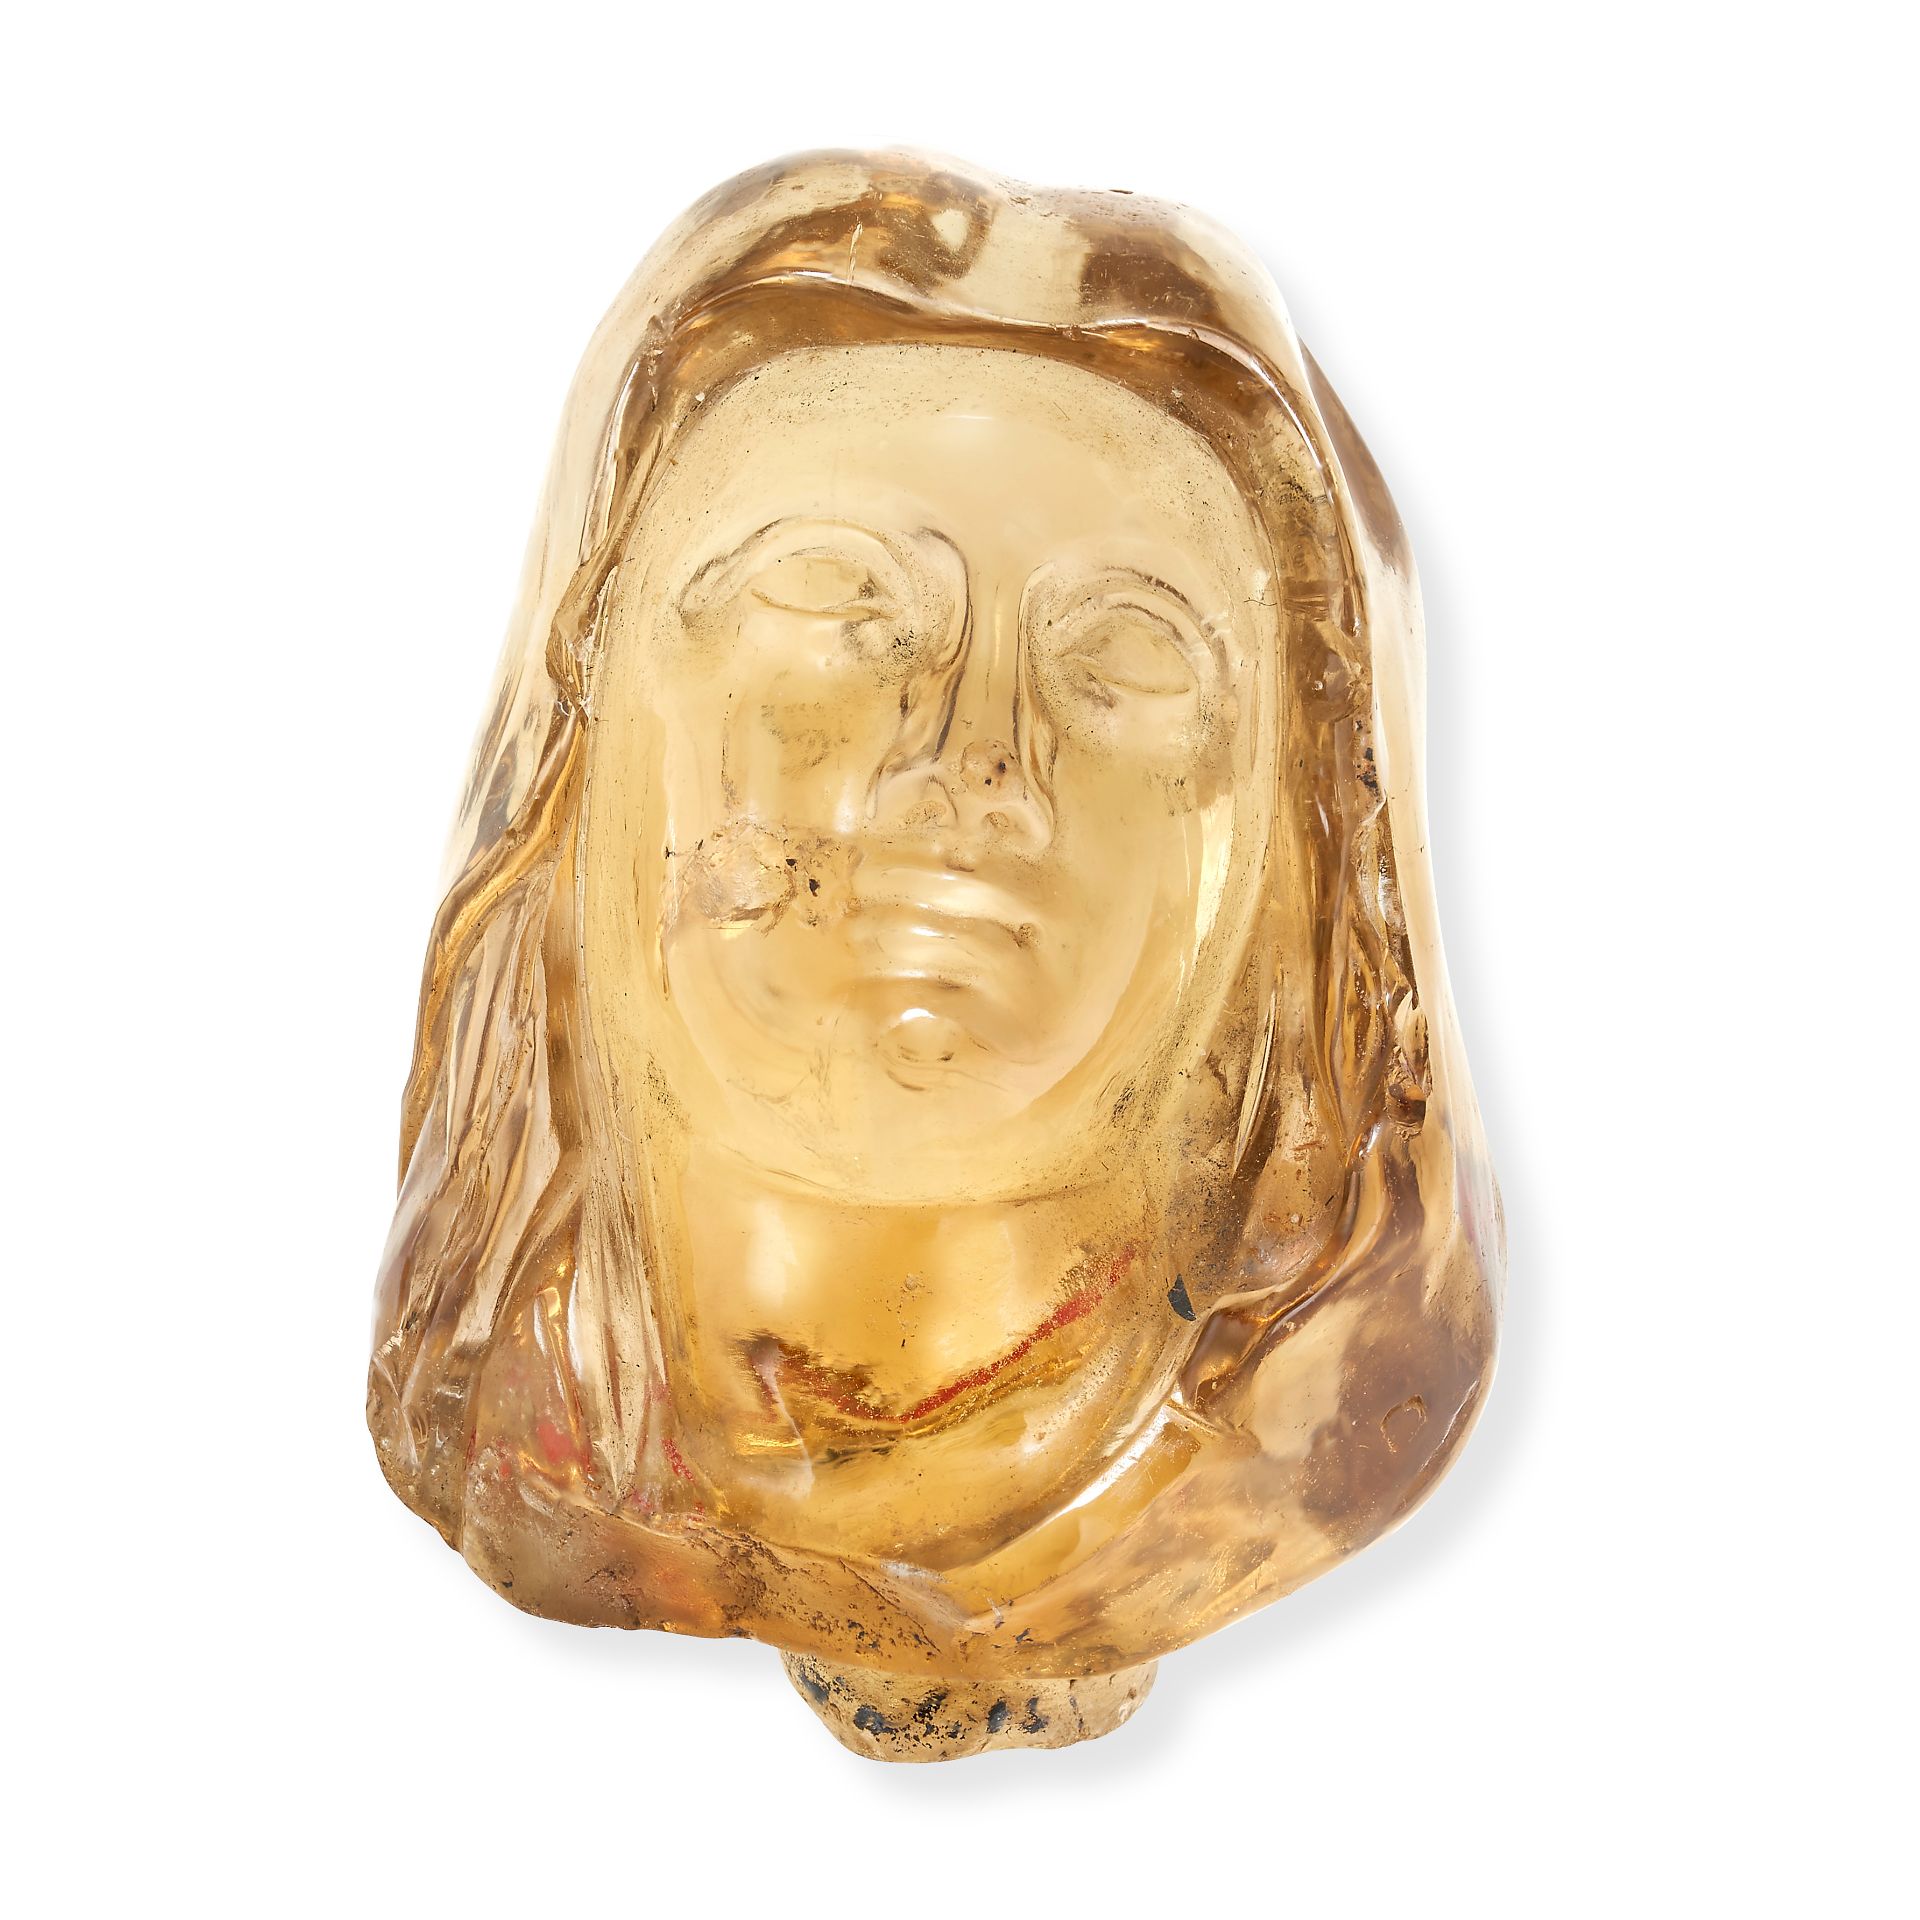 AN ANTIQUE CARVED CITRINE BOTTLE STOPPER carved from a single piece of citrine to depict the bust...